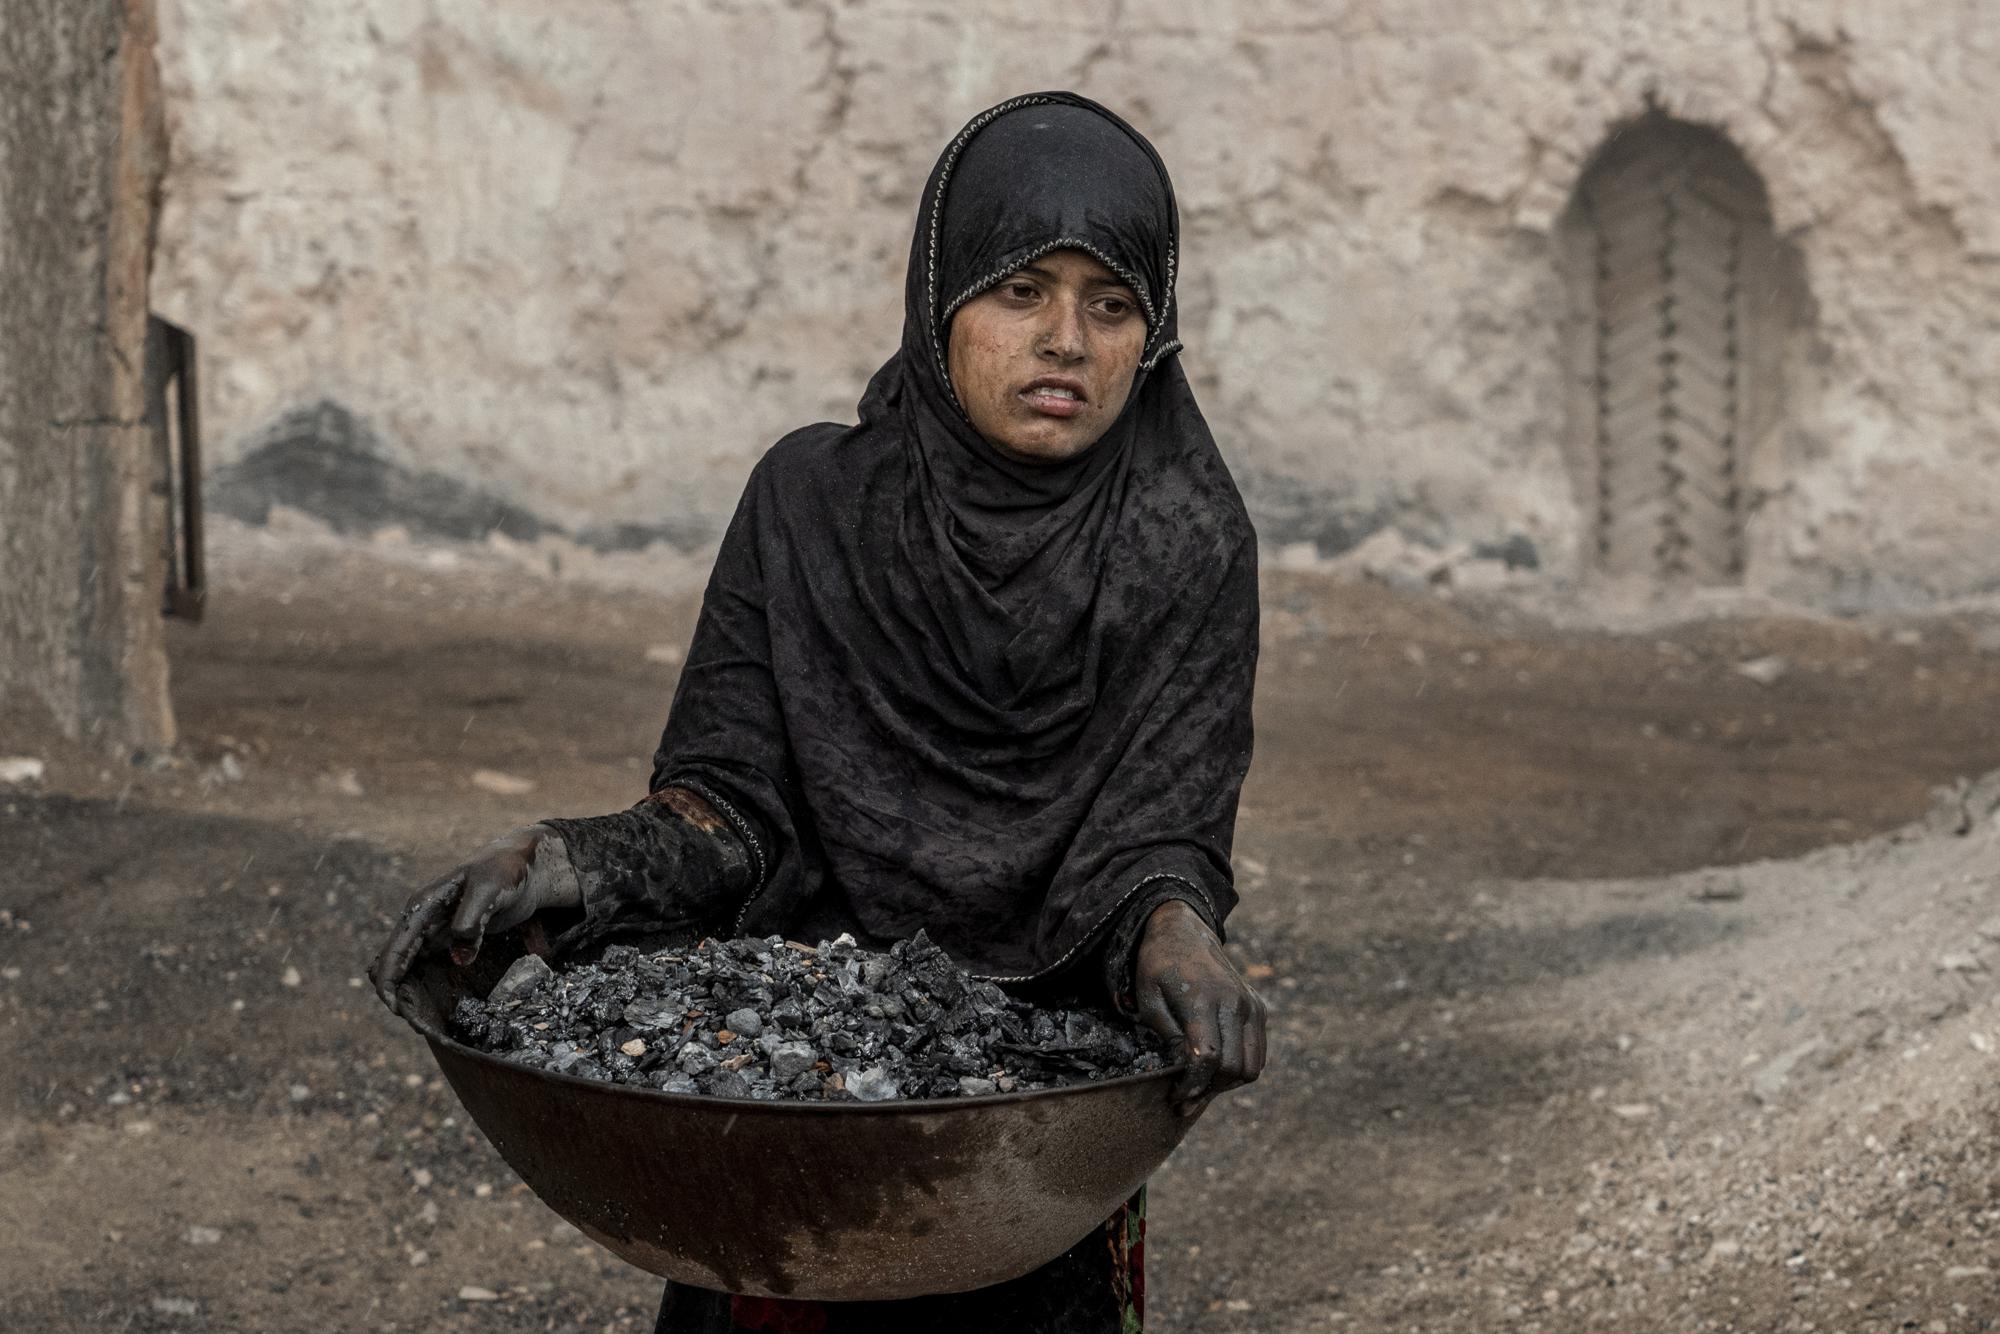 11. A 9-year-old girl works in a brick factory on the outskirts of Kabul, Afghanistan, on Aug. 20, 2022. Aid agencies say the number of children working in Afghanistan is growing ever since the economy collapsed following the Taliban takeover
more than a year ago.